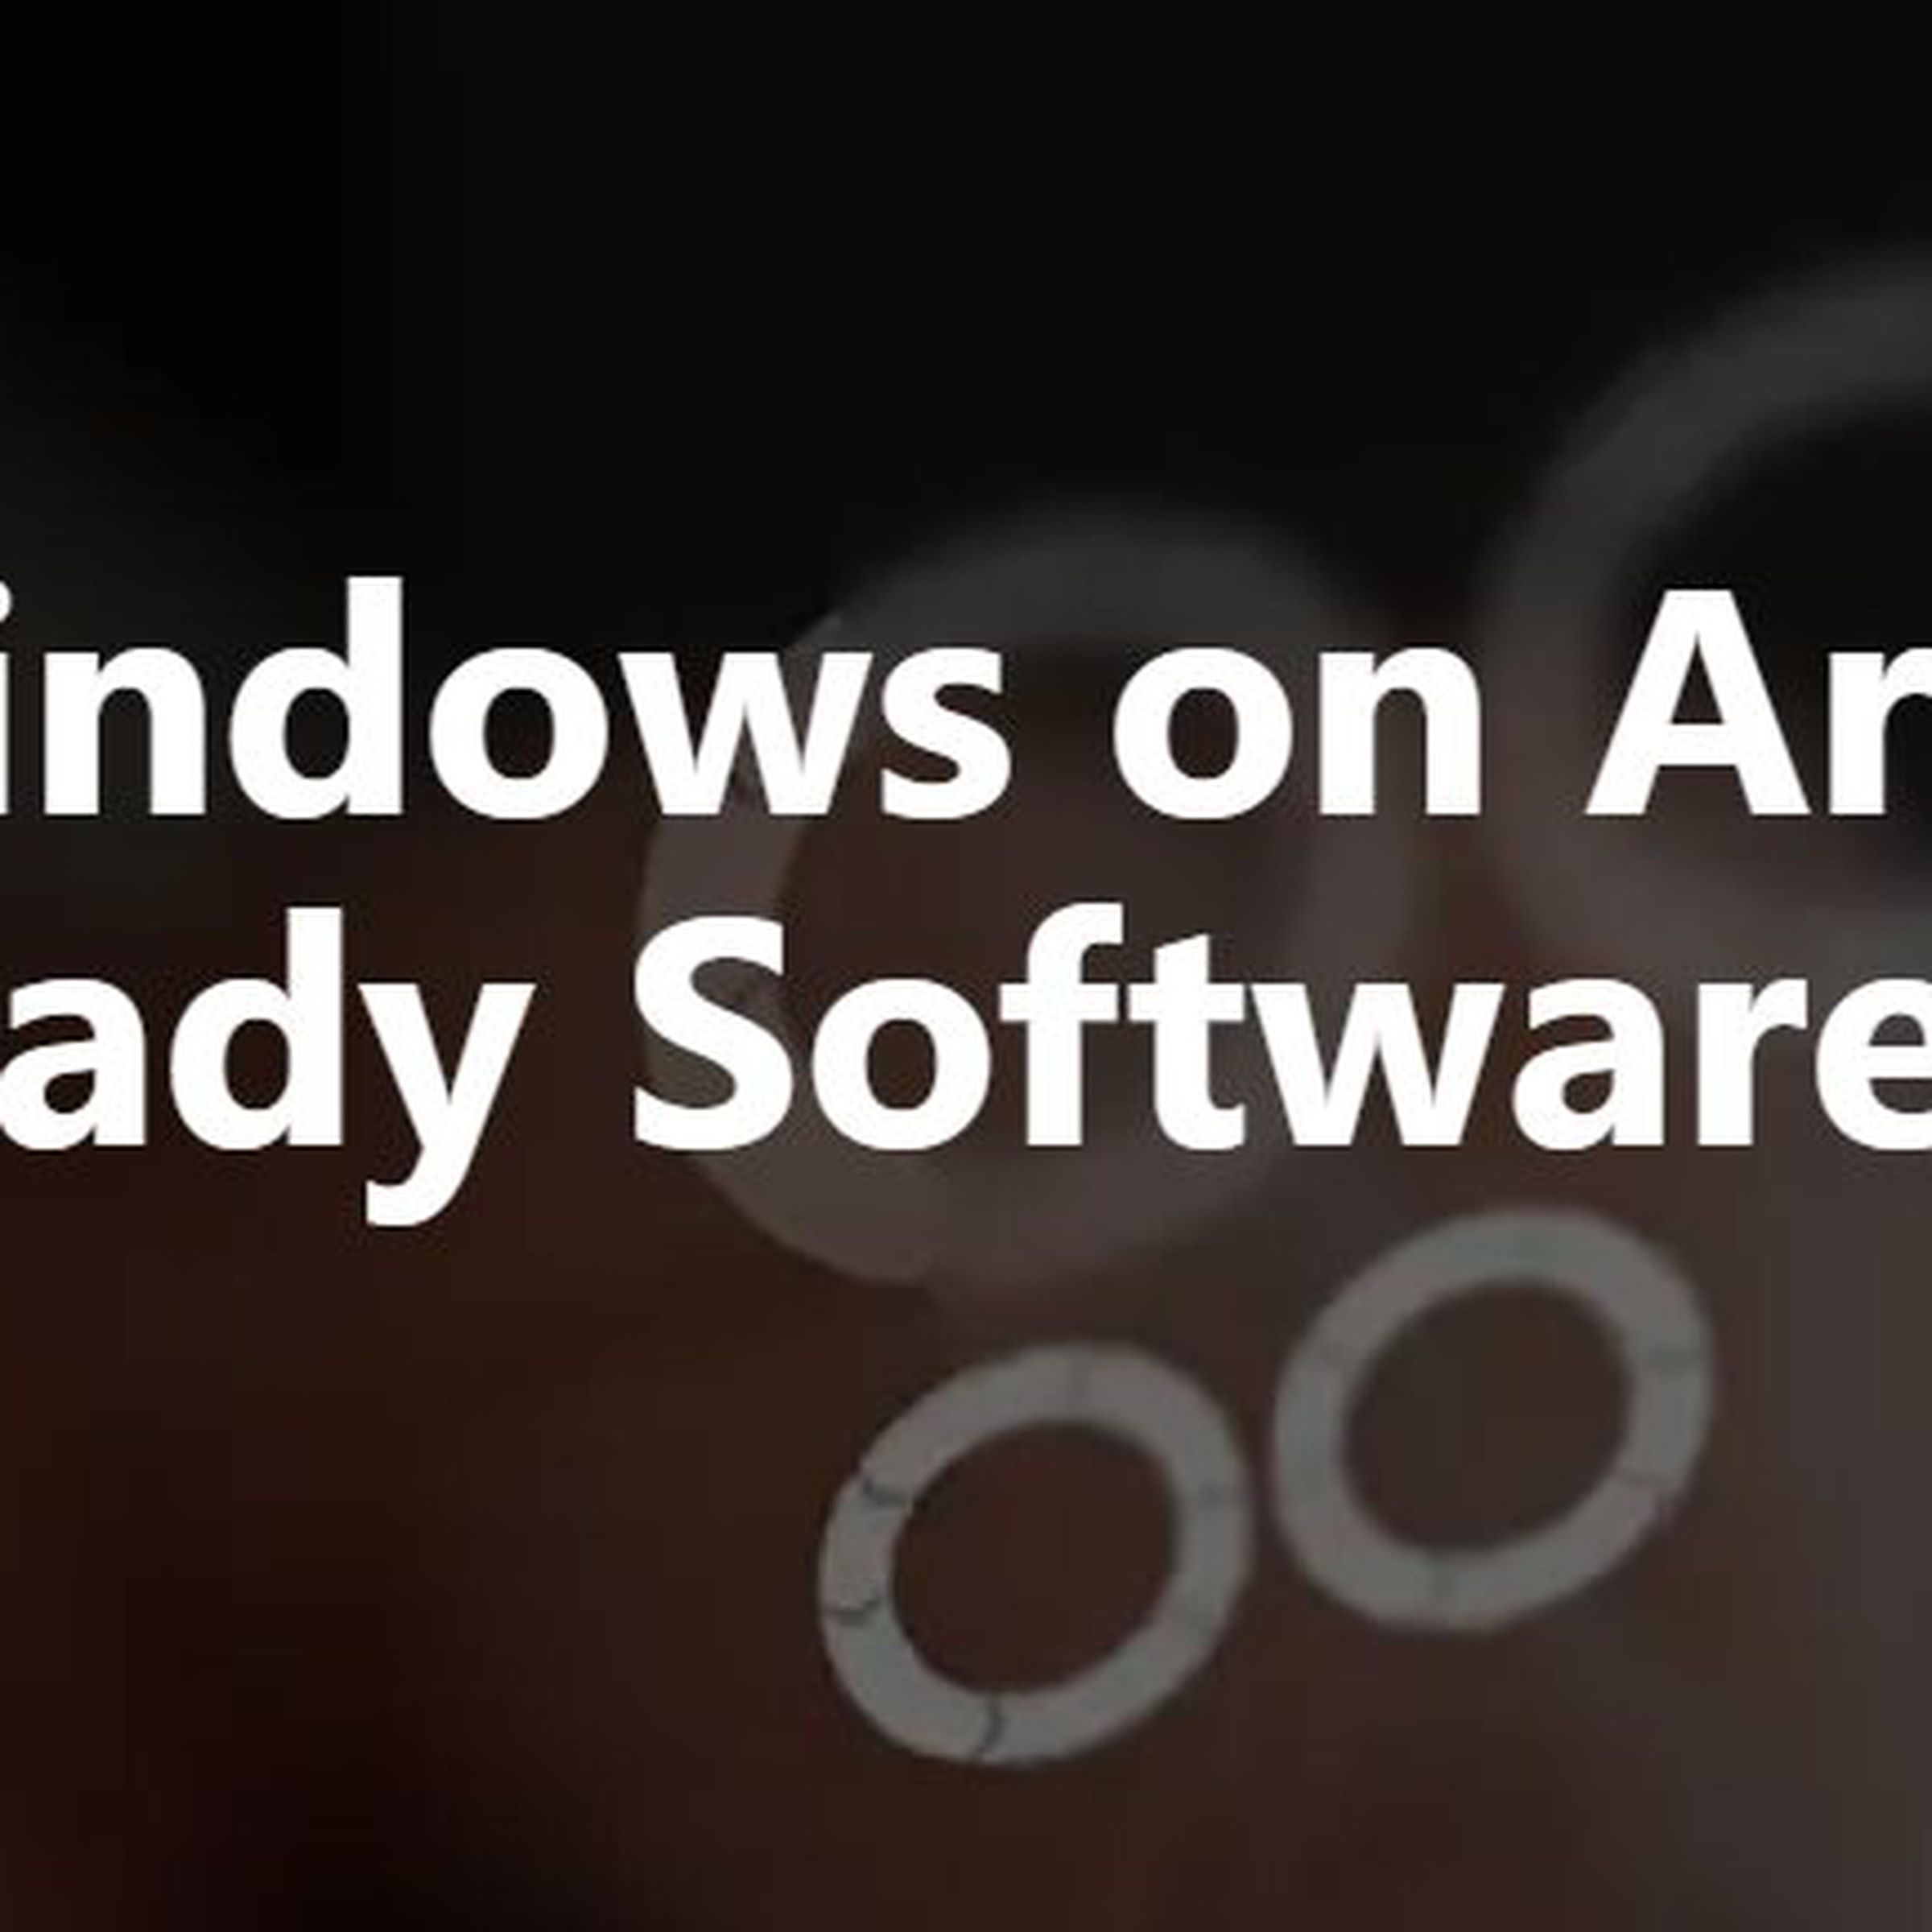 “Windows on Arm Ready Software” reads text on a blurry background.